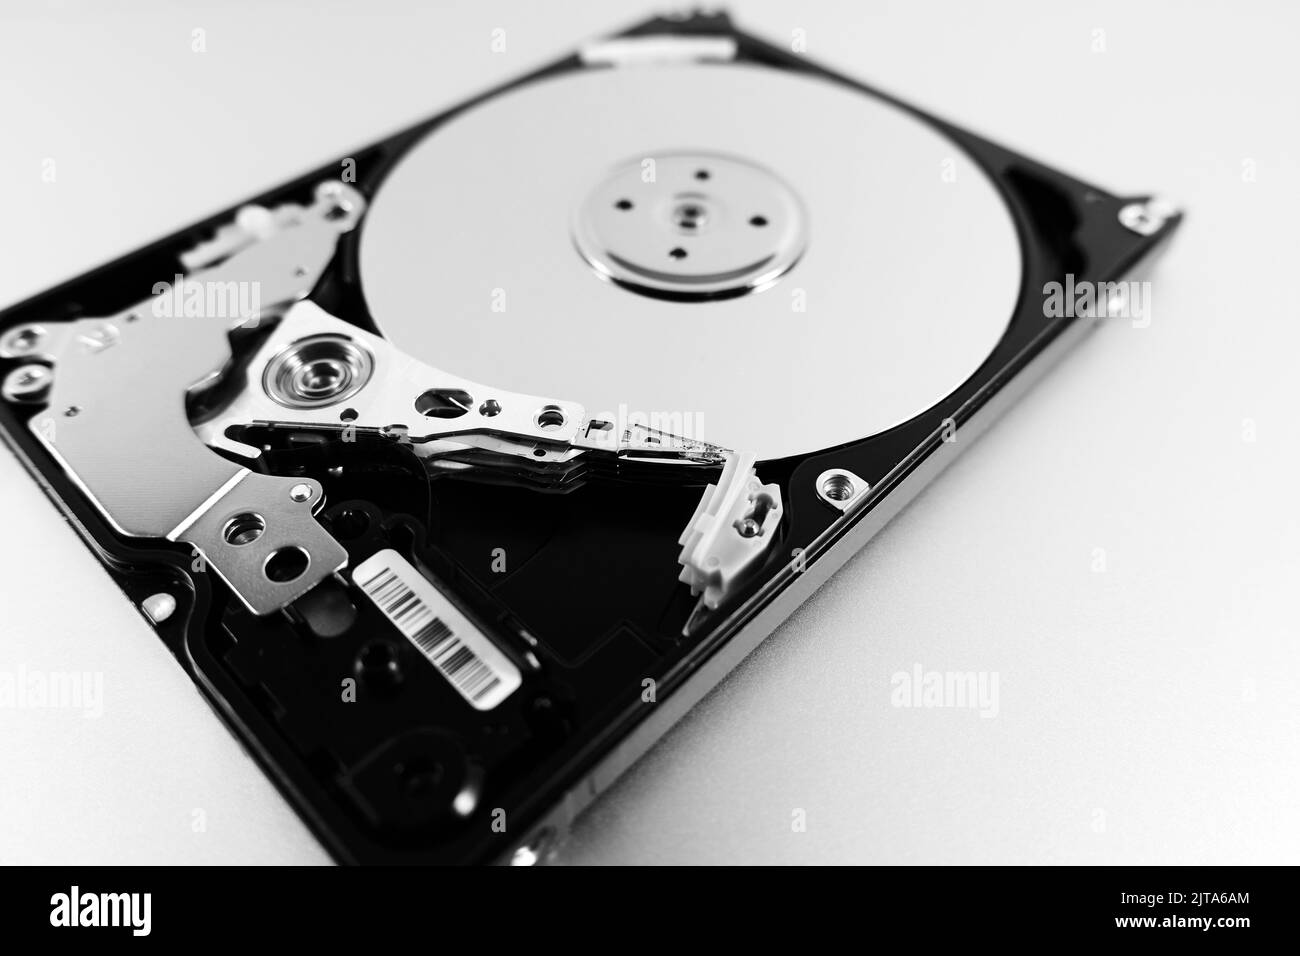 Computer hard drive with top cover removed. Disassembled HDD of a personal computer. Selective Focus Stock Photo